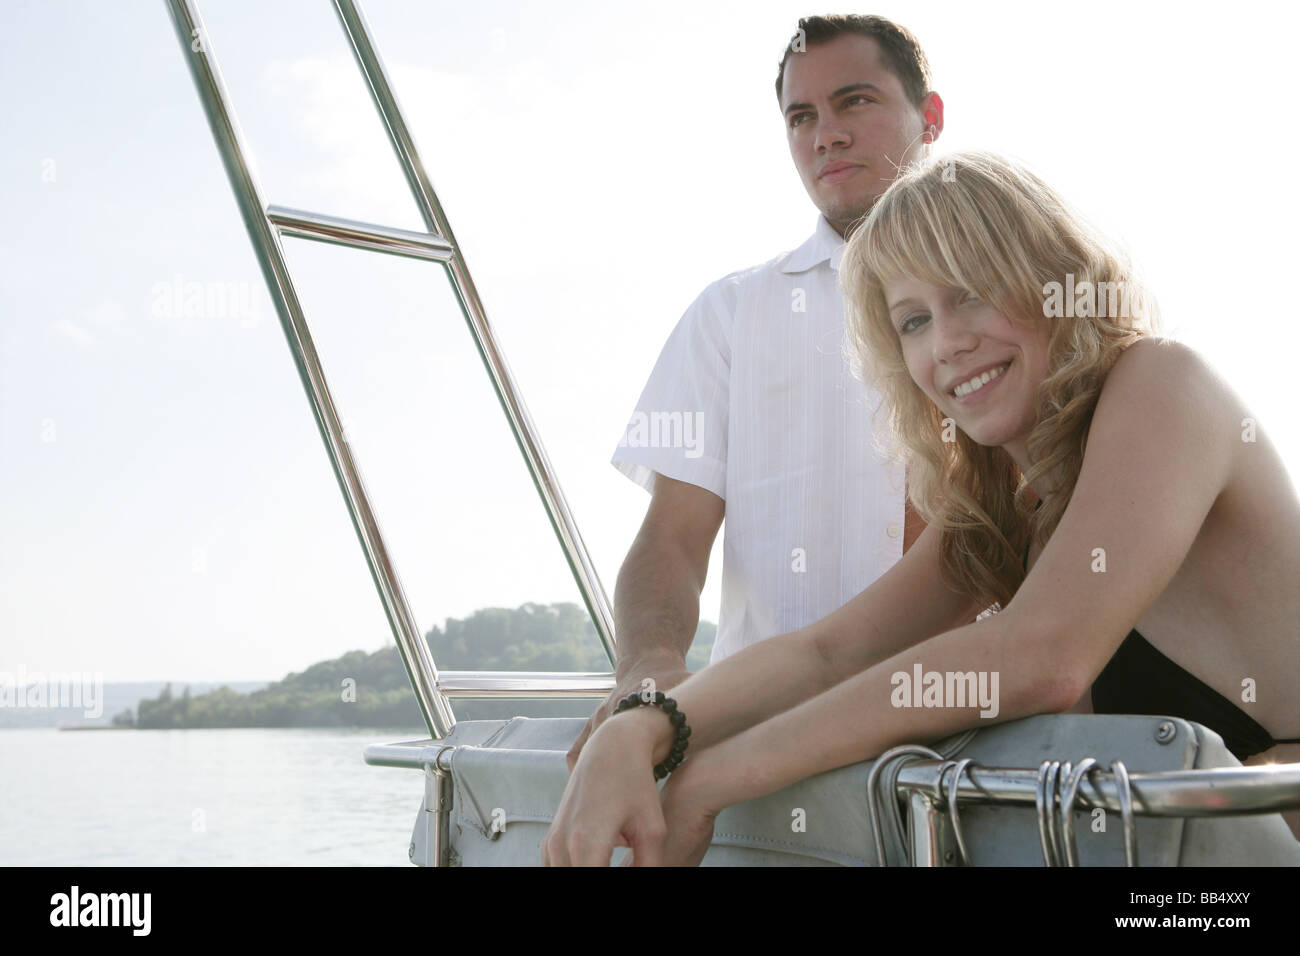 Portrait of a young couple on a yacht Stock Photo